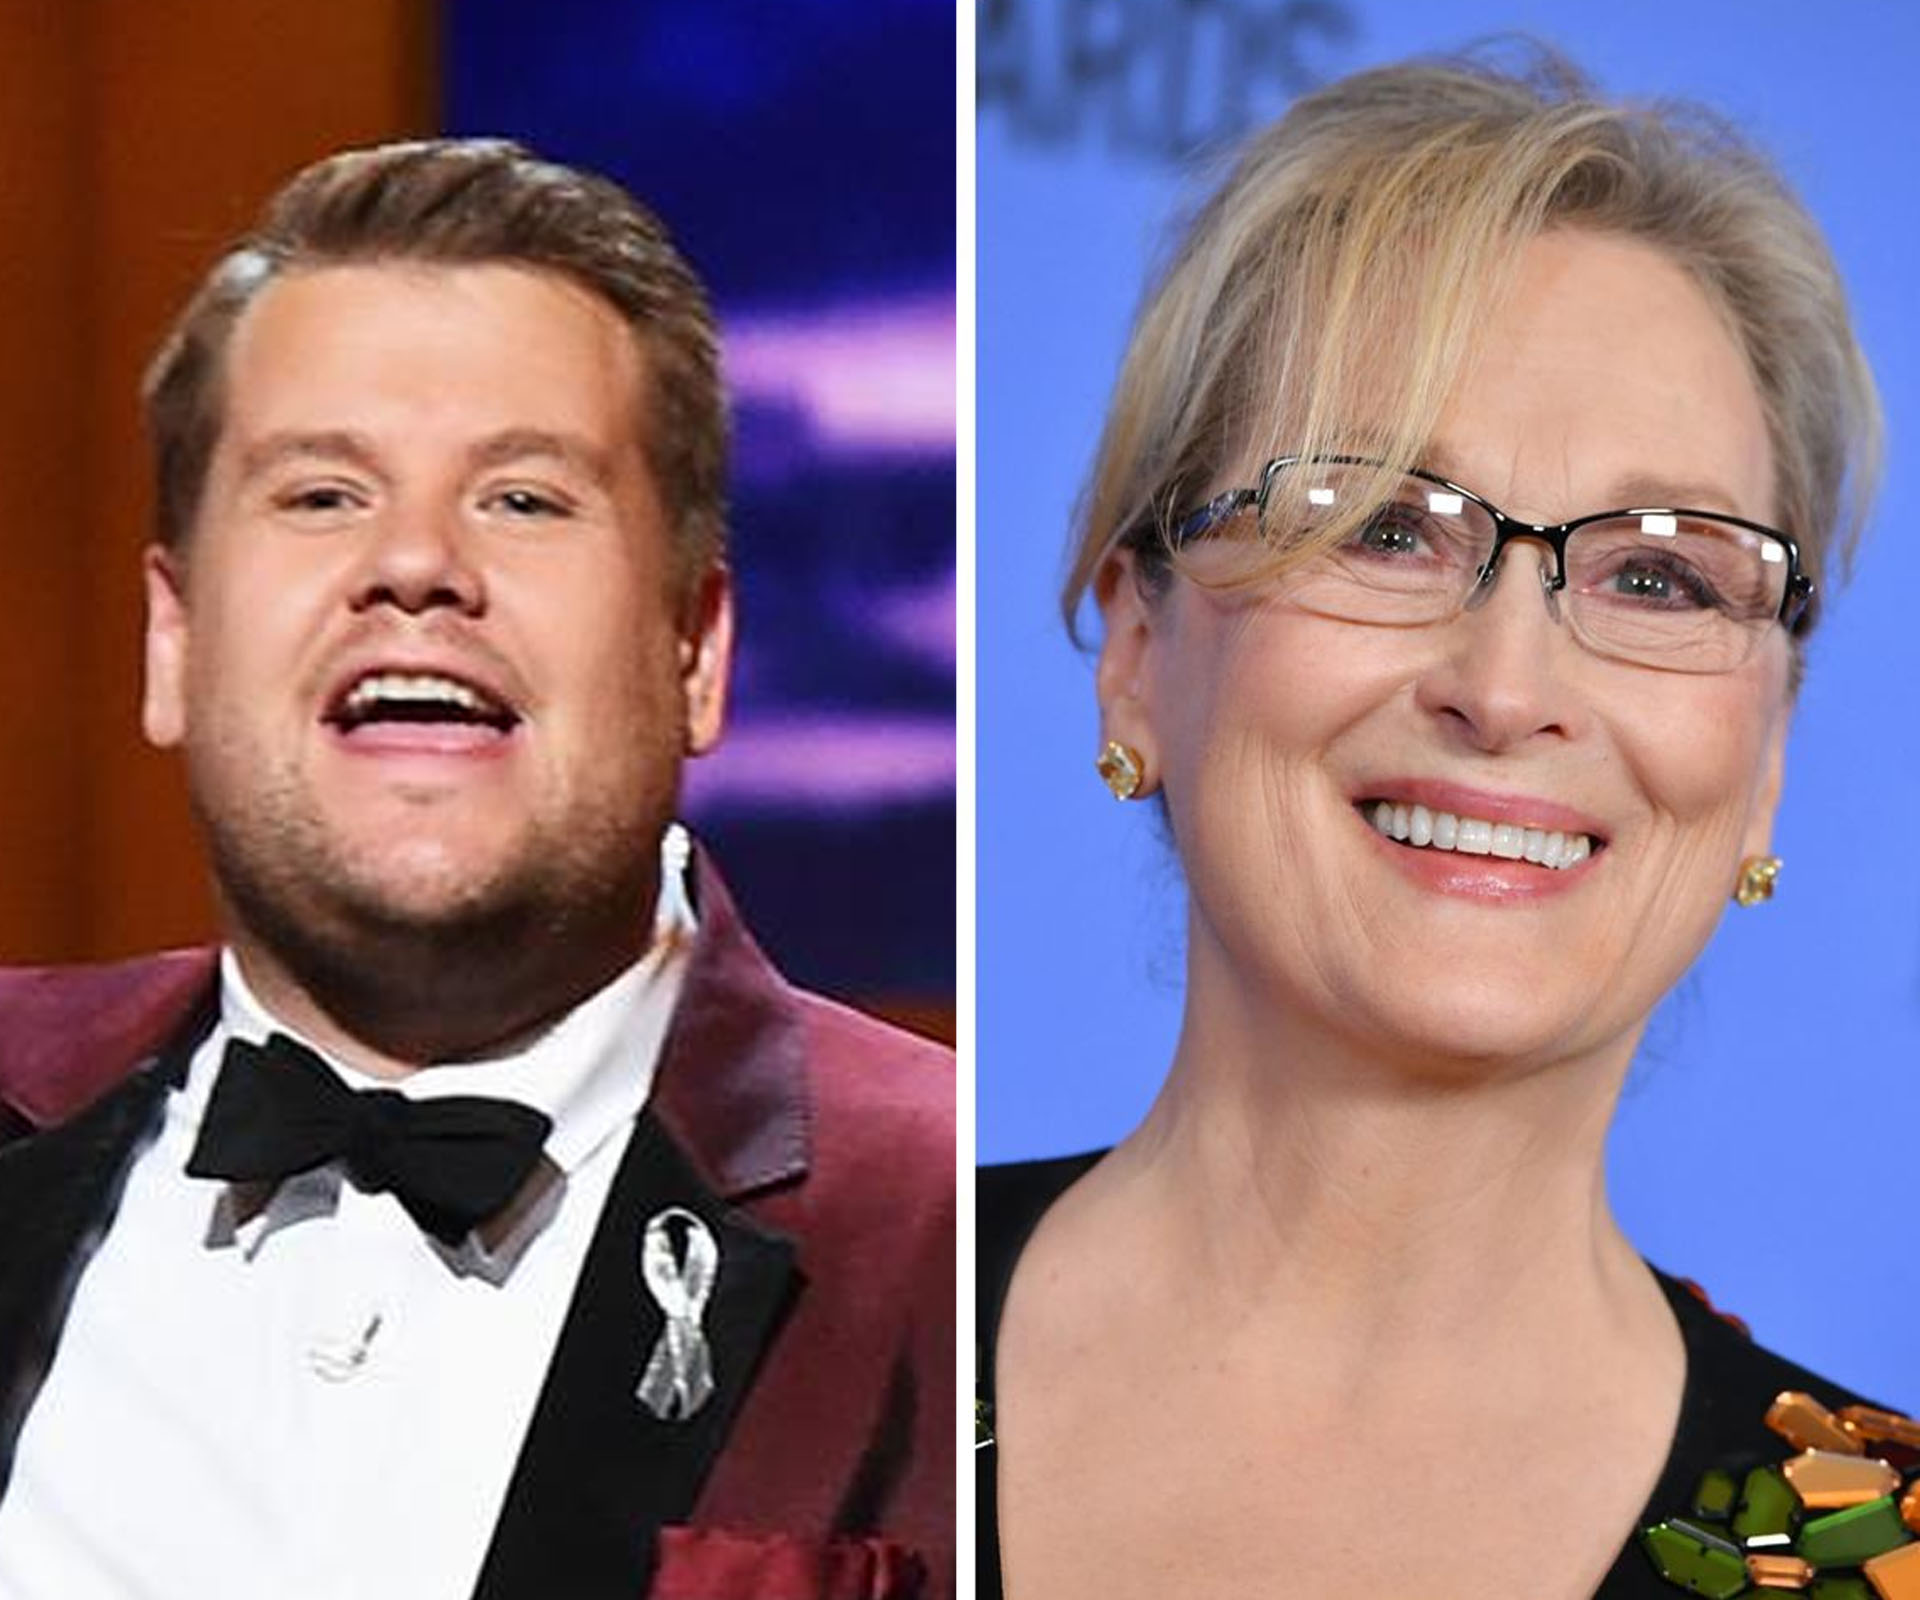 James Corden reveals what he really thinks about Meryl Streep